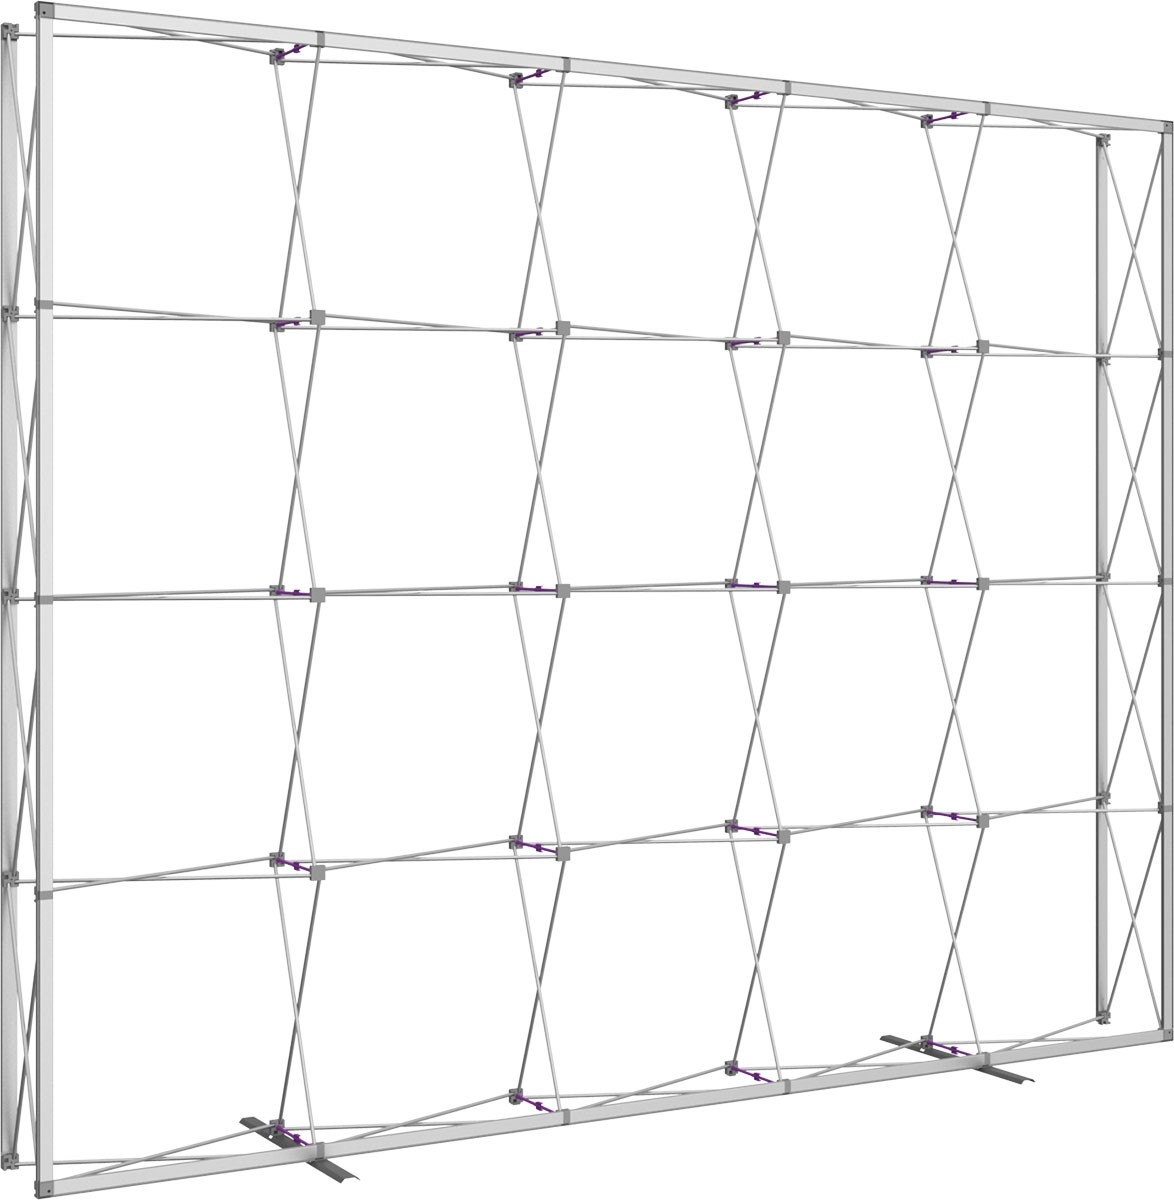 Embrace 12' Extra Tall Tension Fabric Display